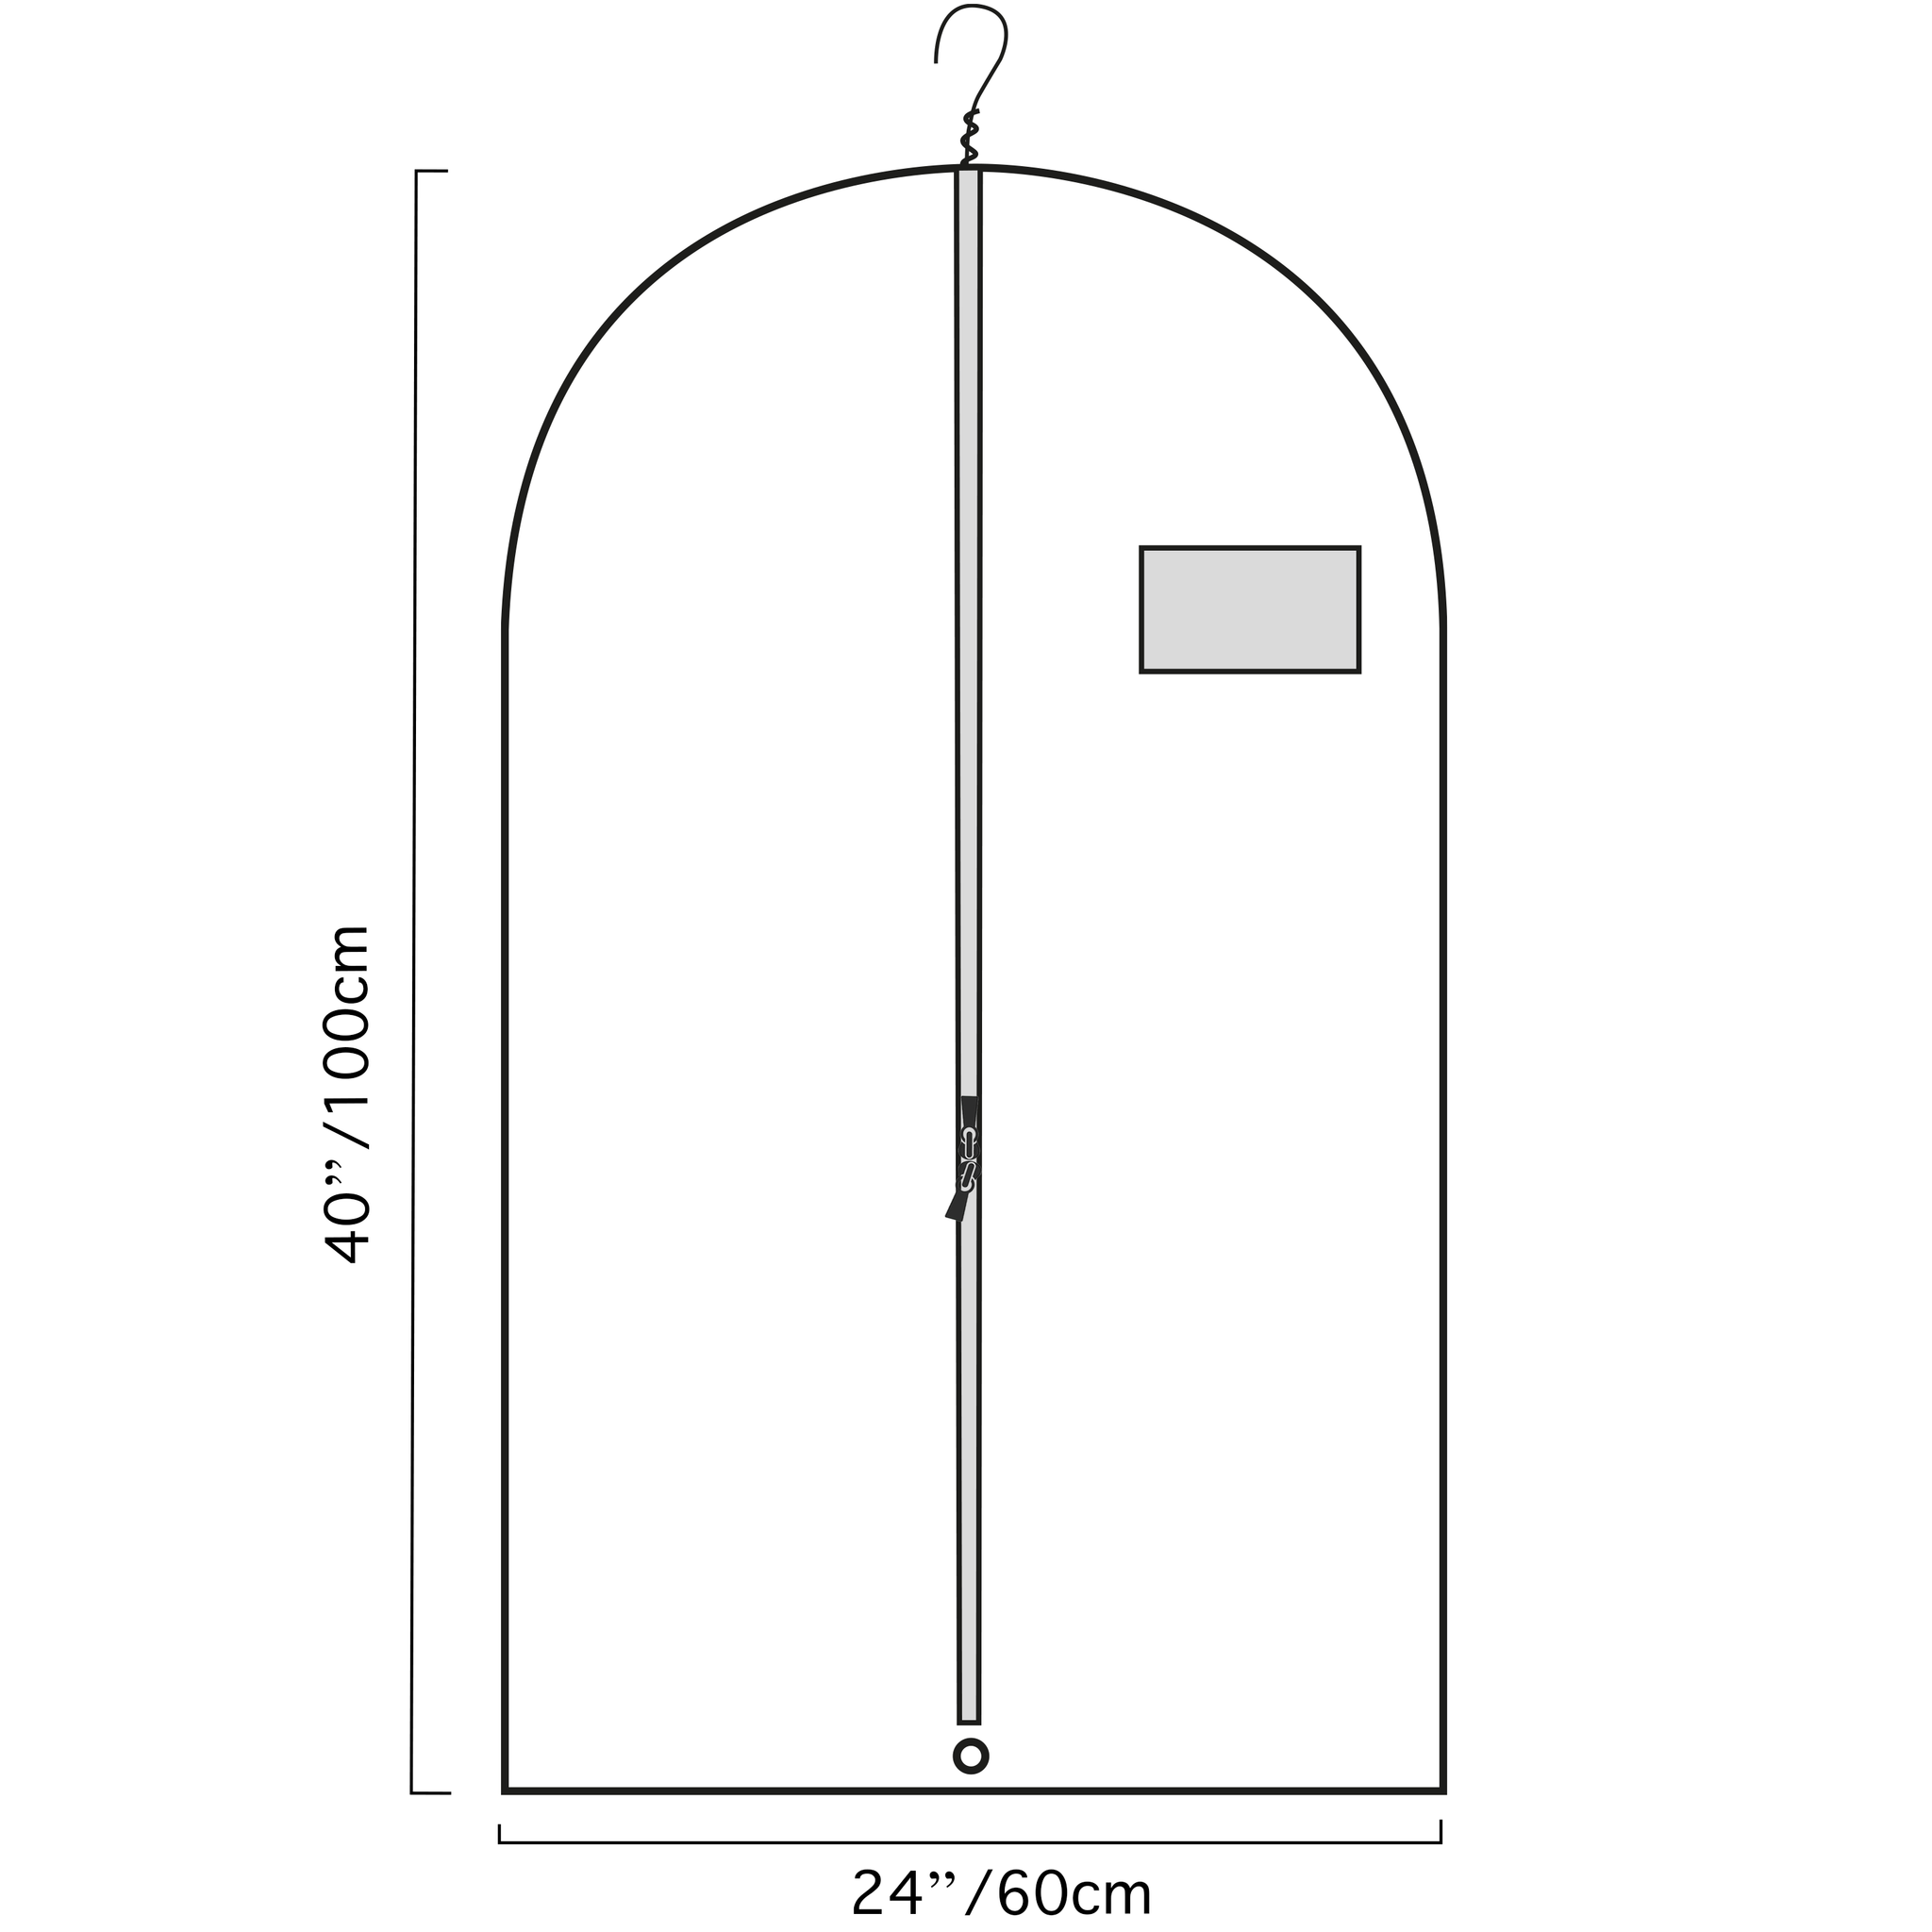 Suit Cover 40" size guide